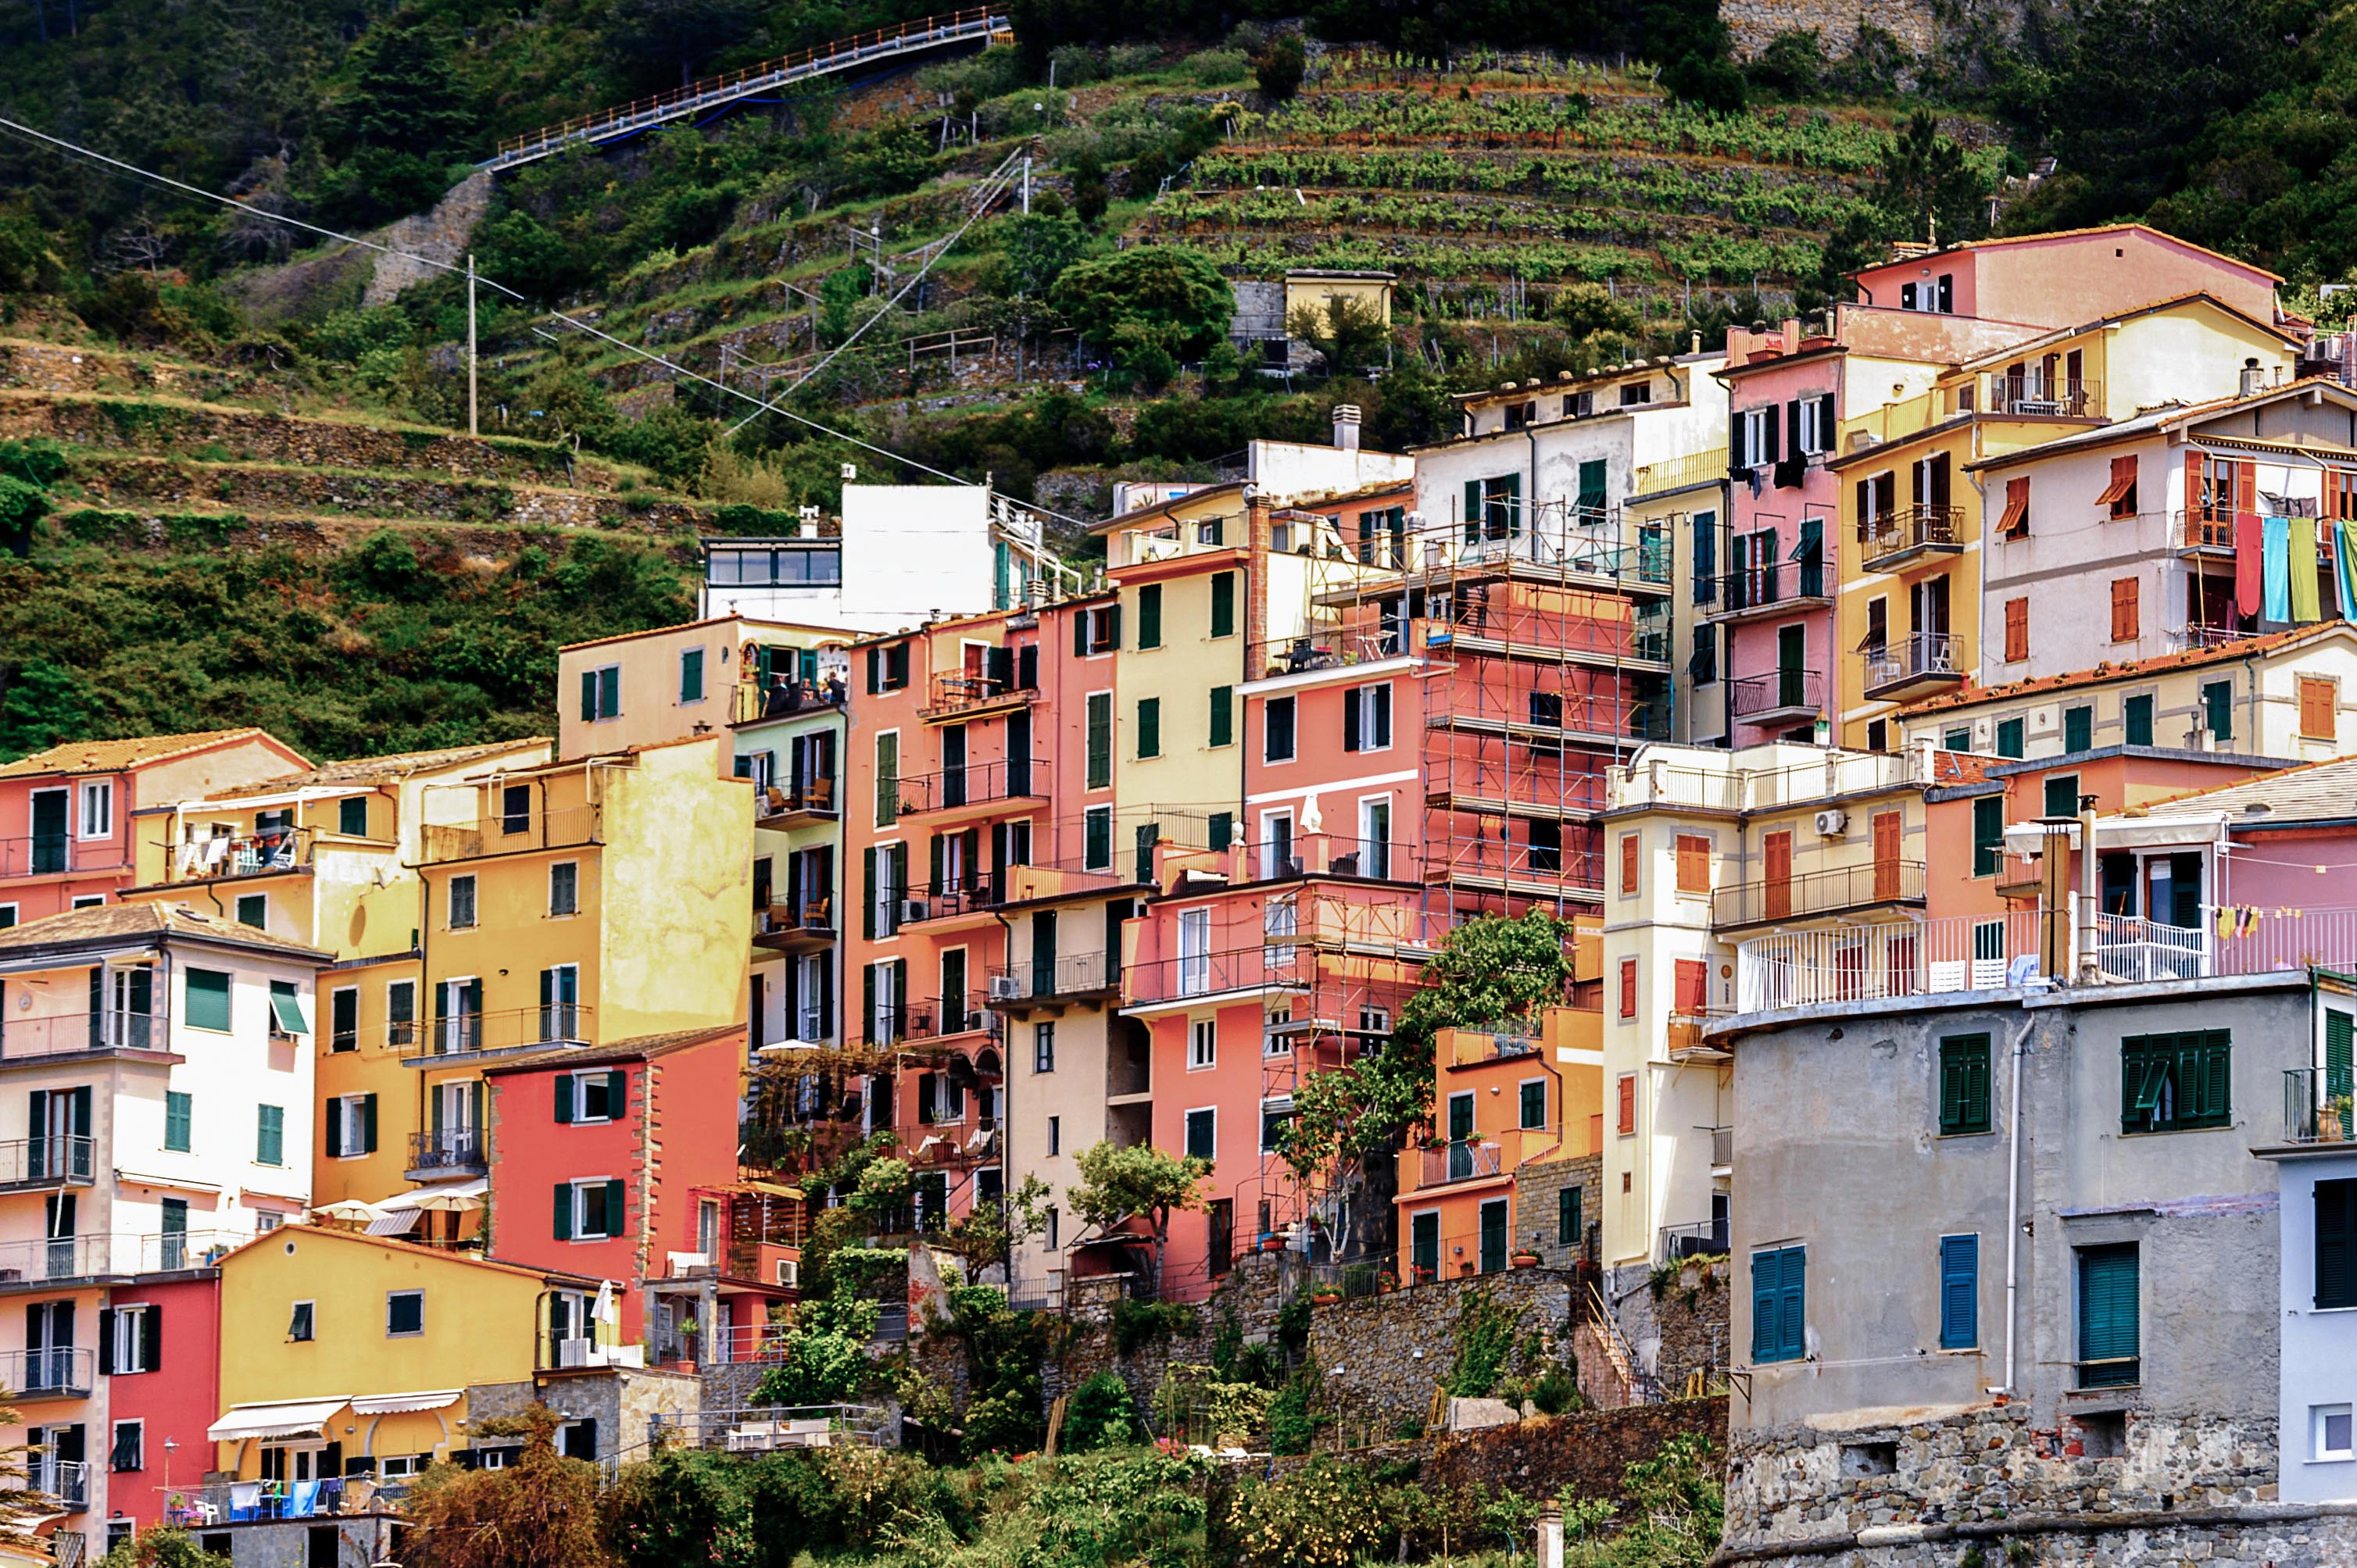 A hillside town in Italy.